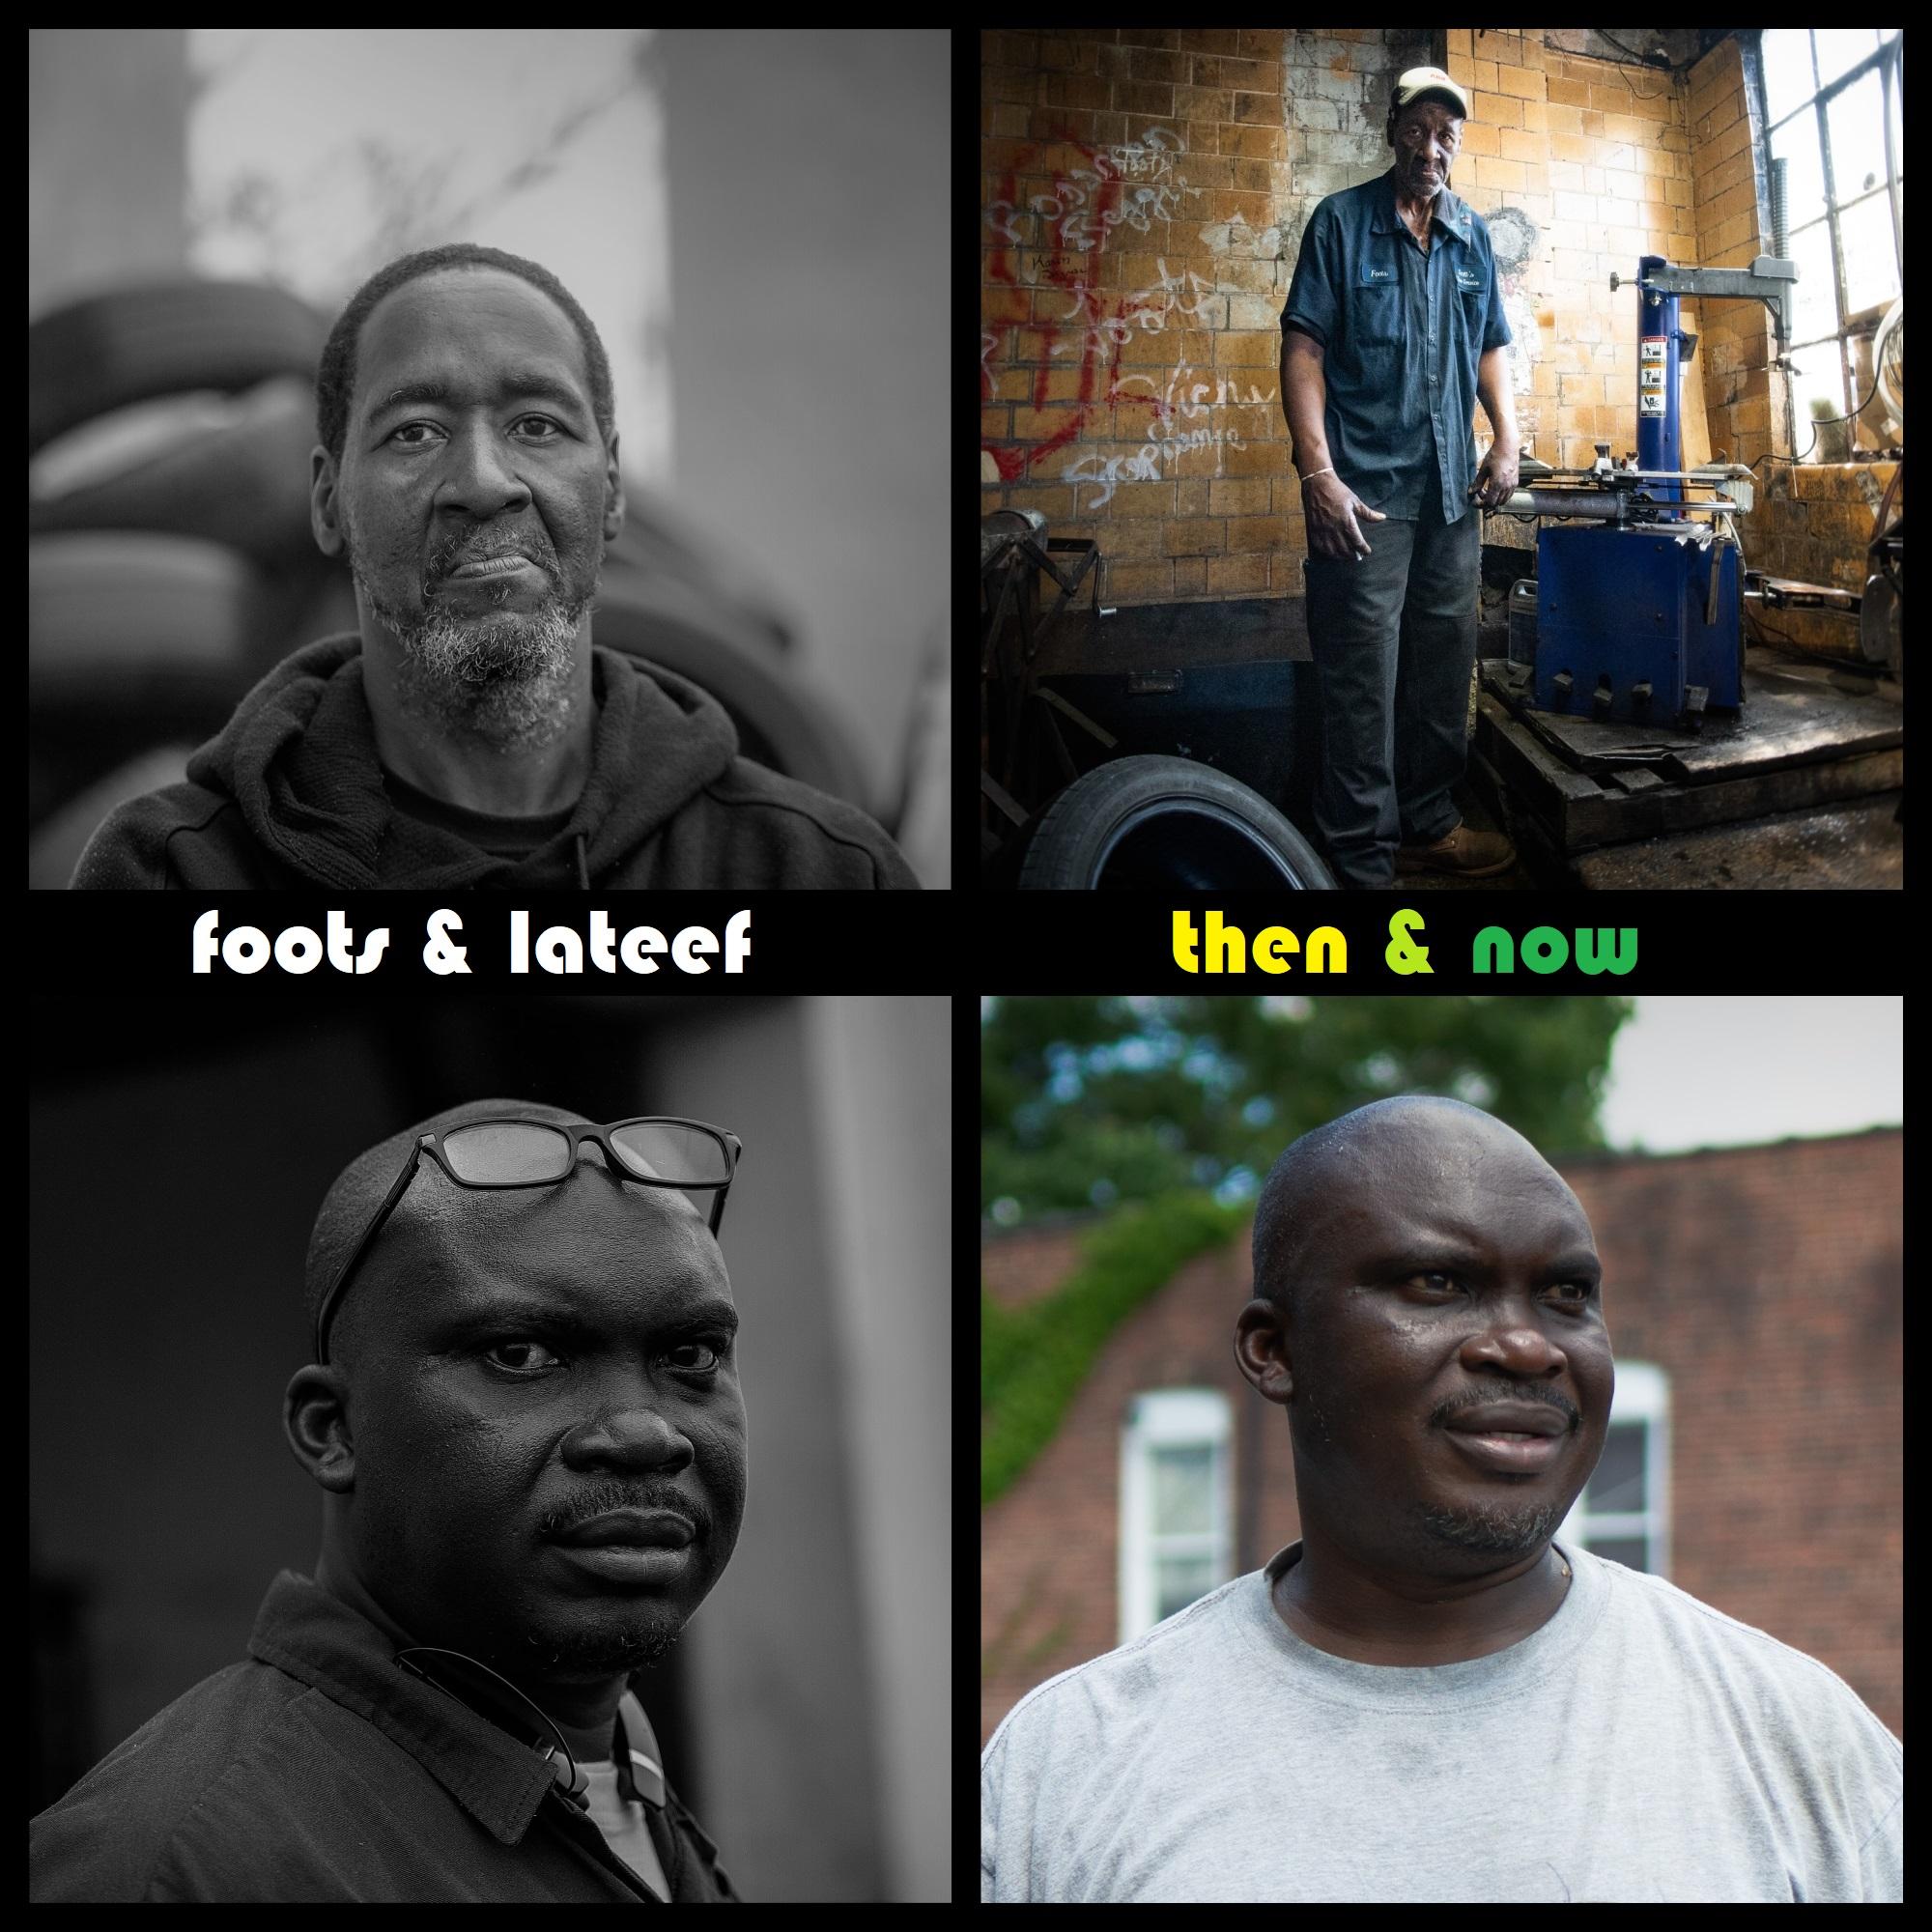 Thumbnail for "Foots & Lateef, Then & Now".